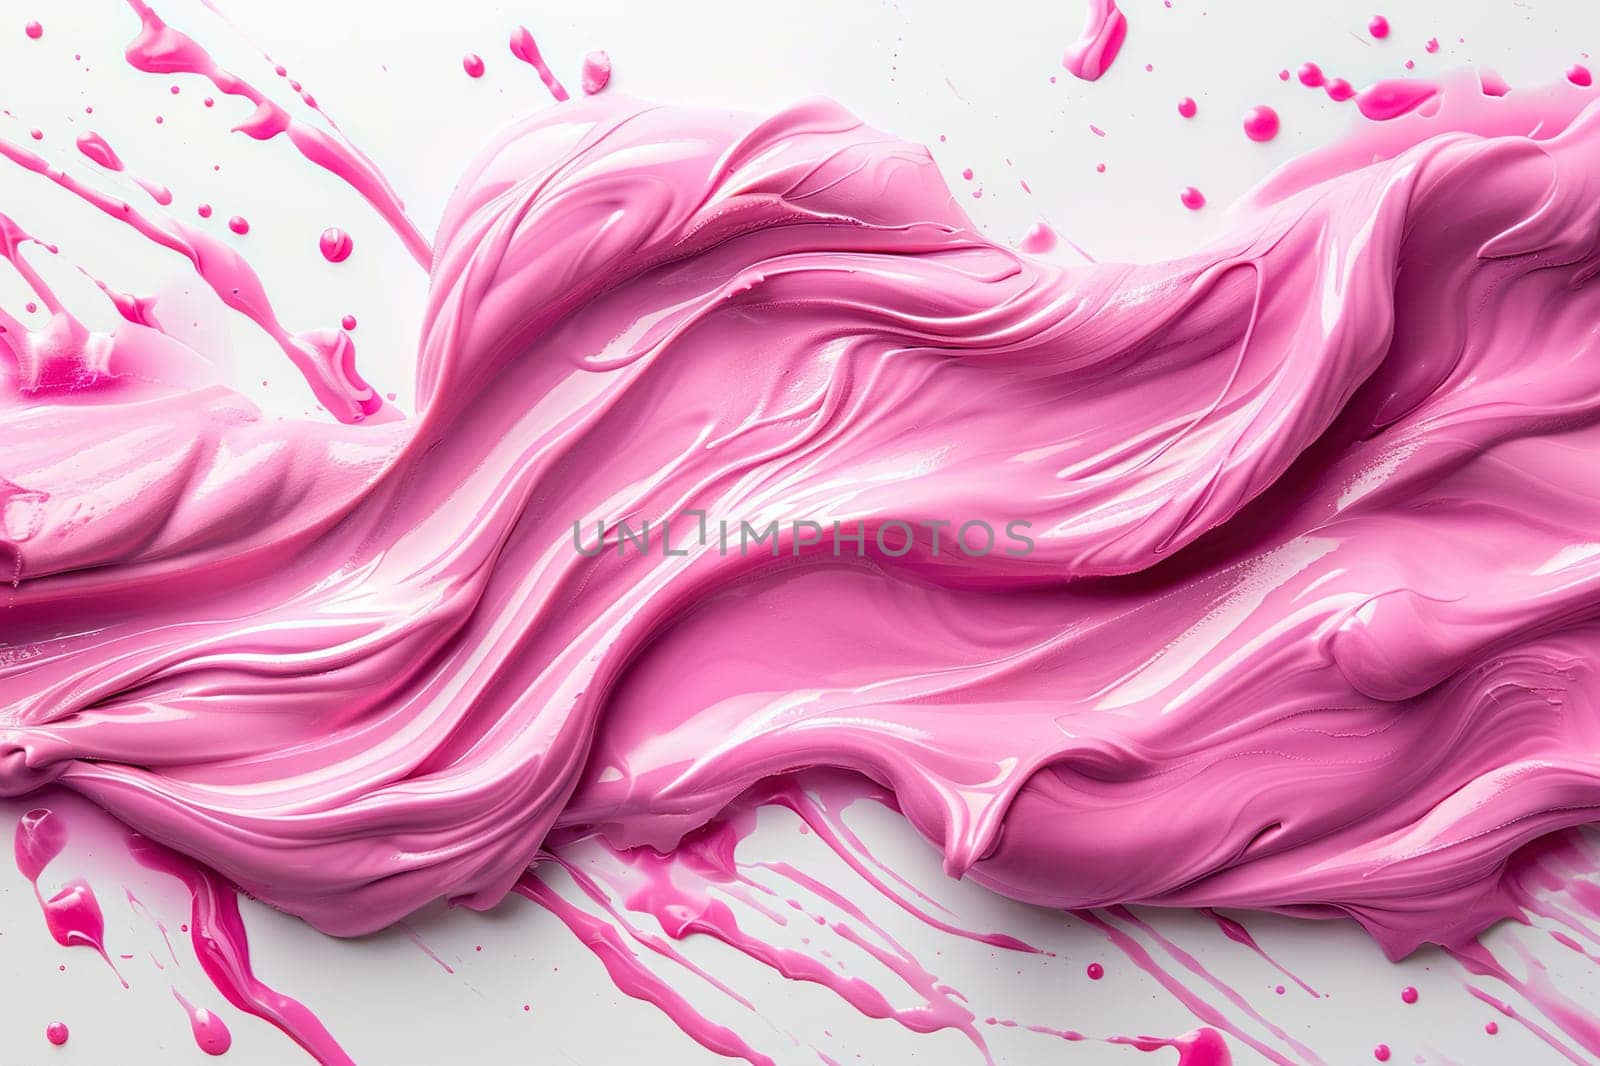 Liquid pink texture smoothly flows over a white background.